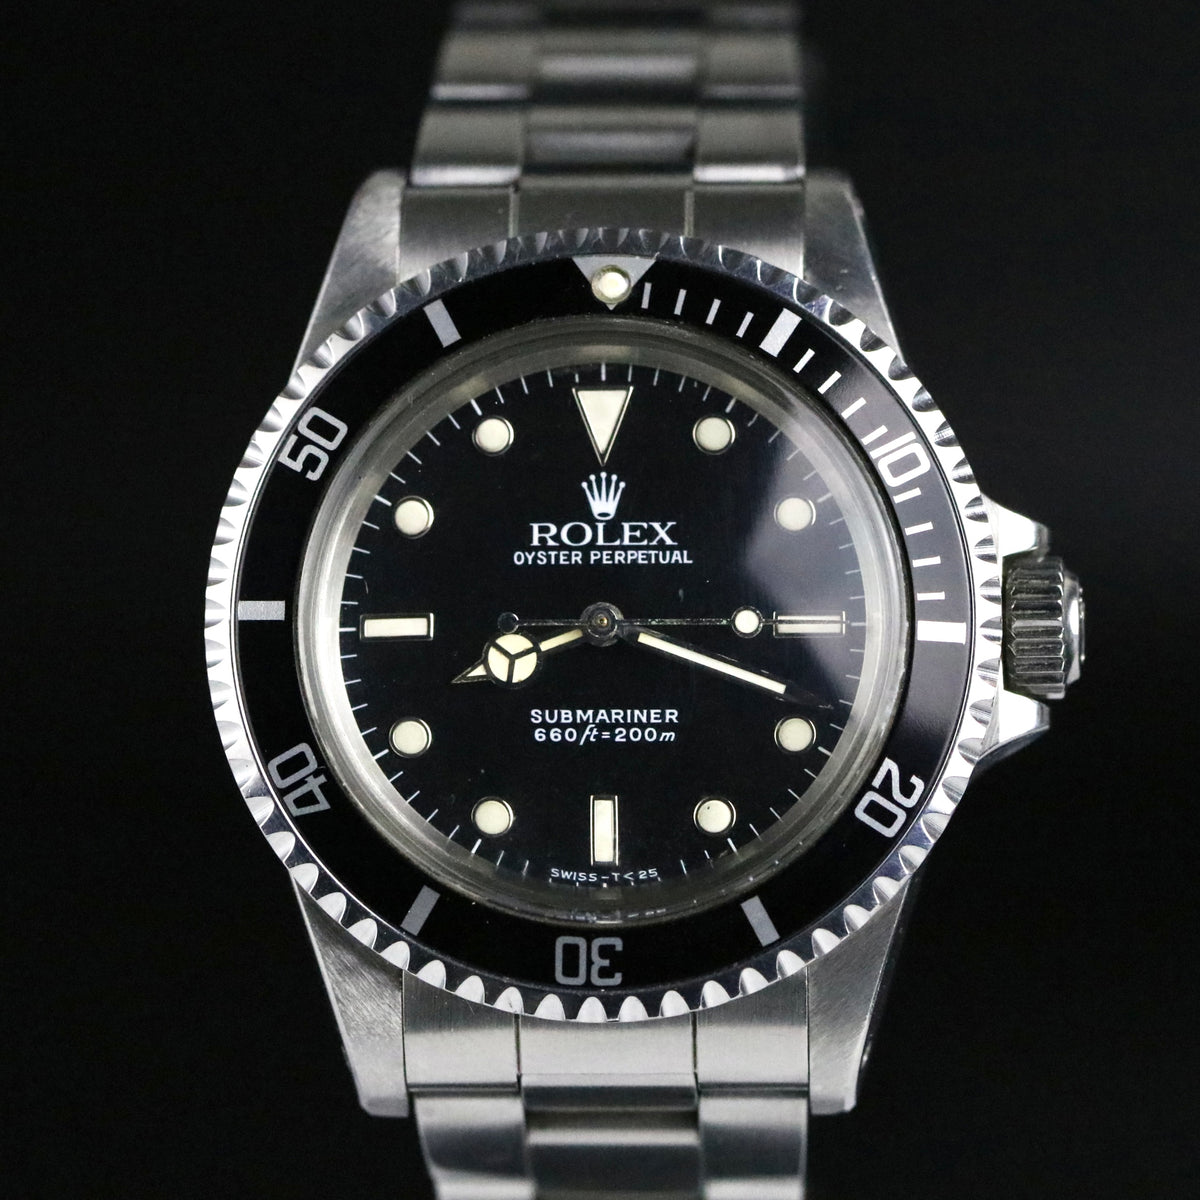 1987 Rolex 5513 No-Date Submariner with Paper, Serialized Tag